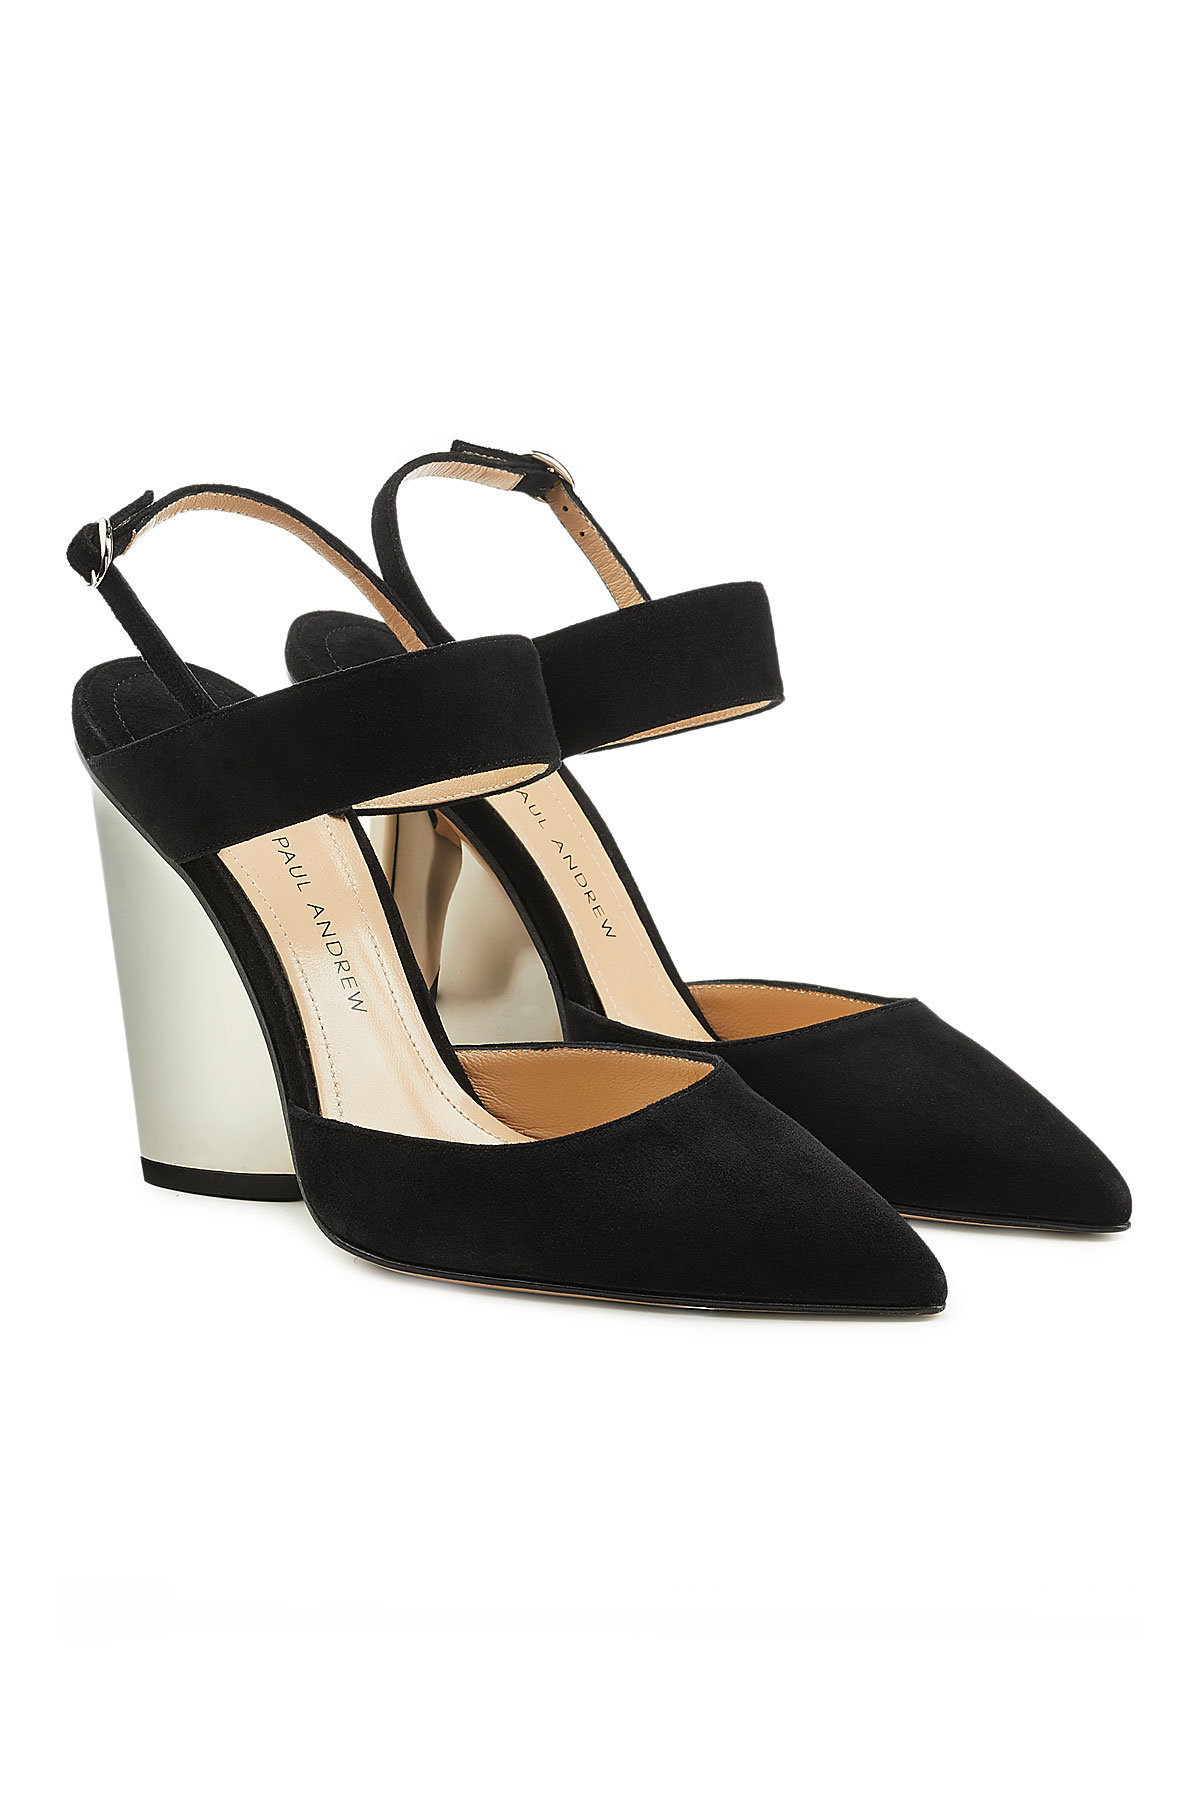 Pawson Suede Slingback Pumps by Paul Andrew